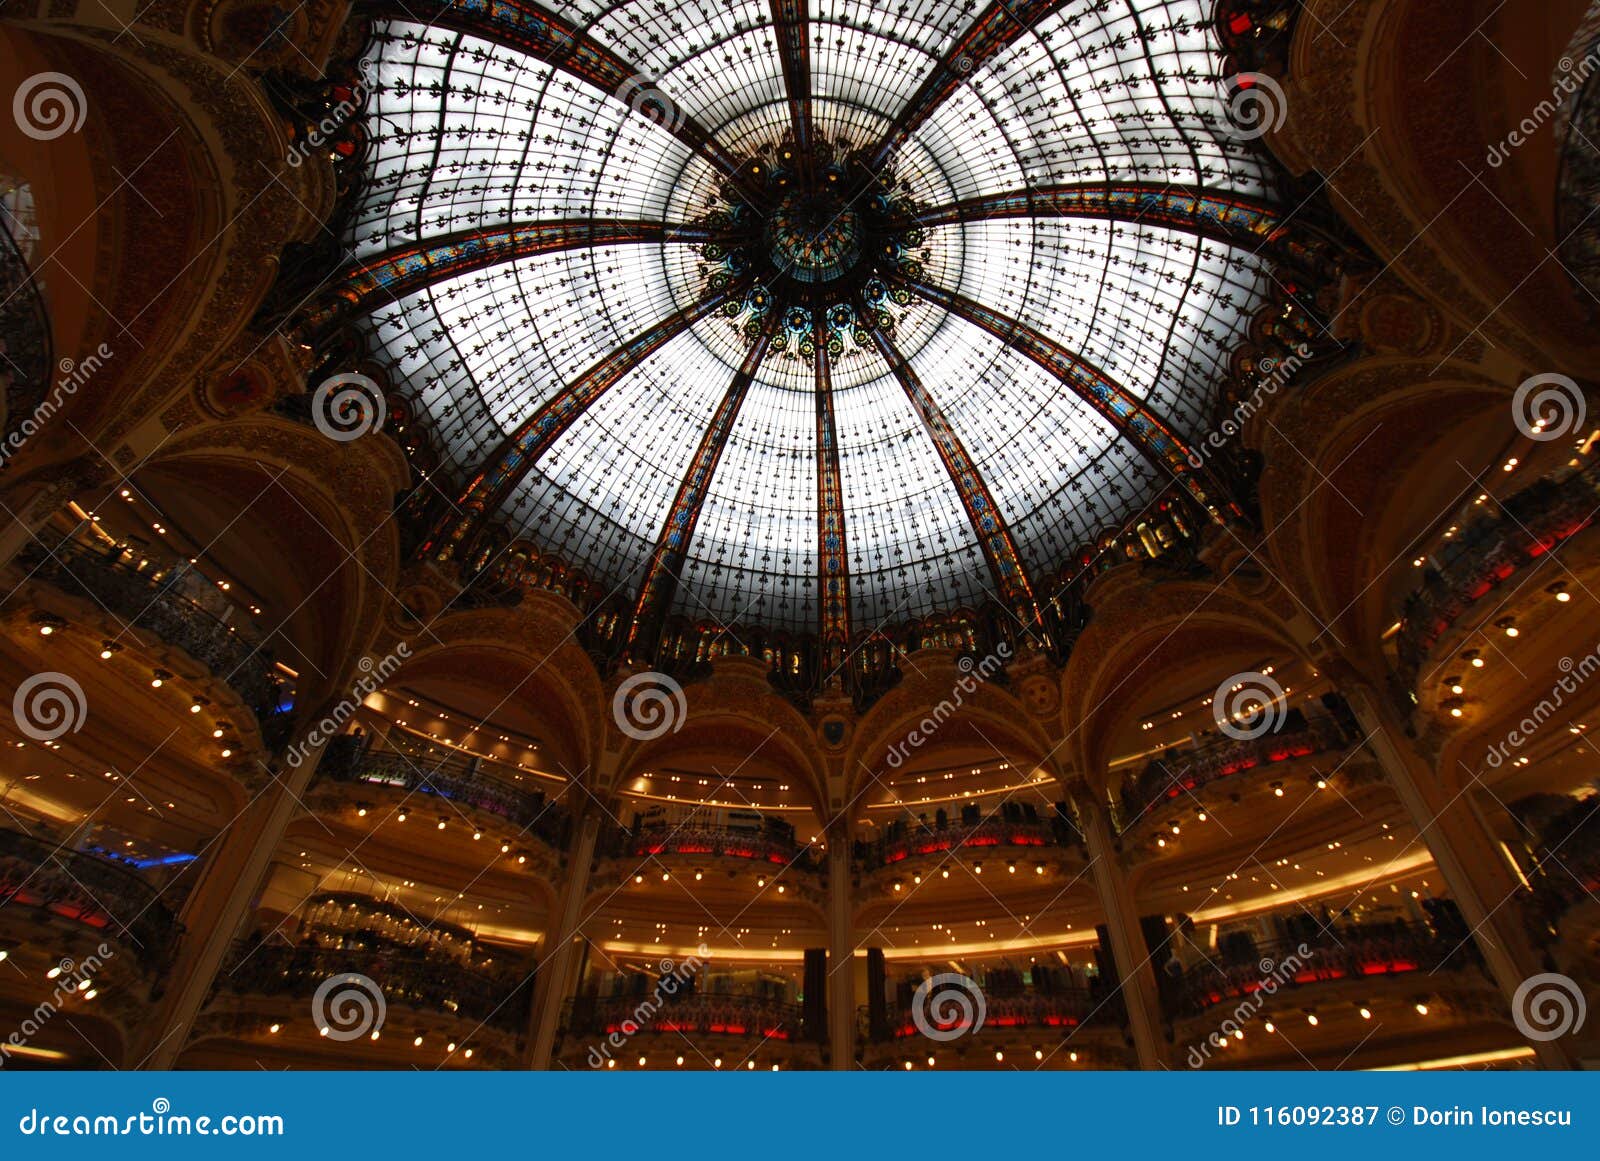 Galeries Lafayette Store Landmark Dome Ceiling Stained Glass